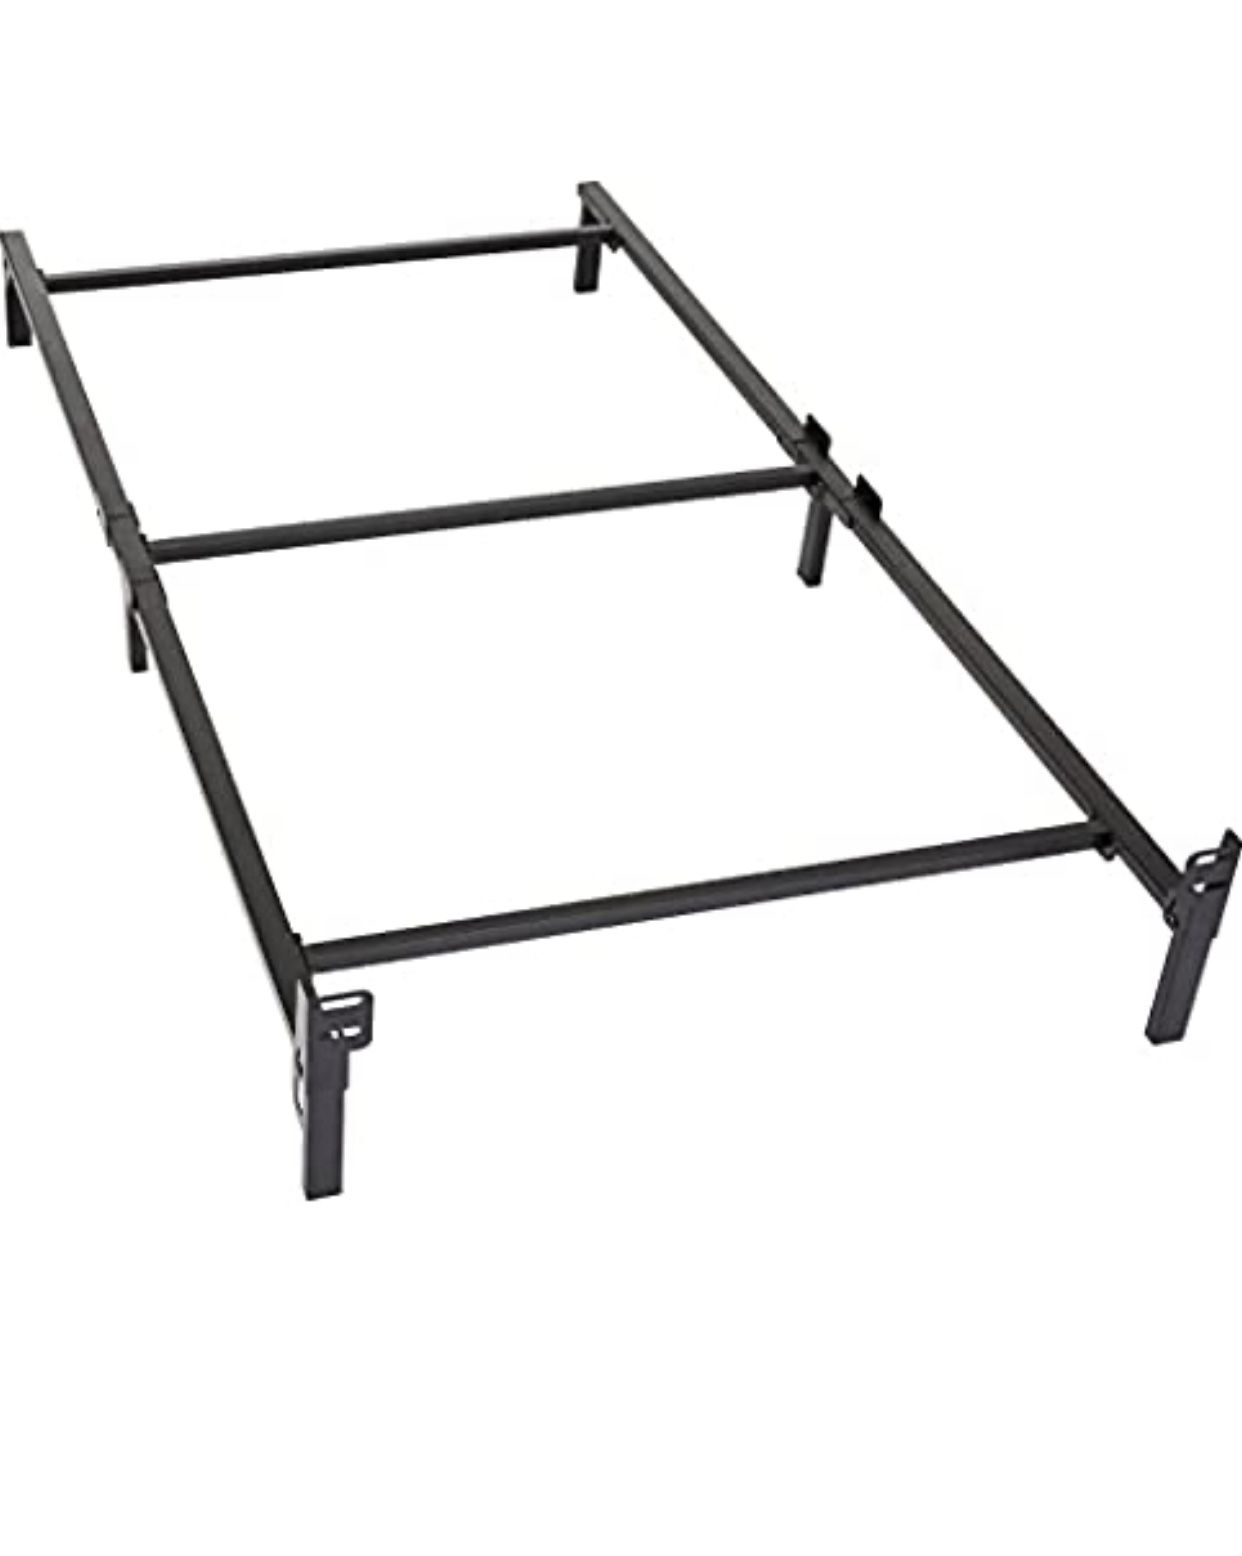 TWIN frame and box spring